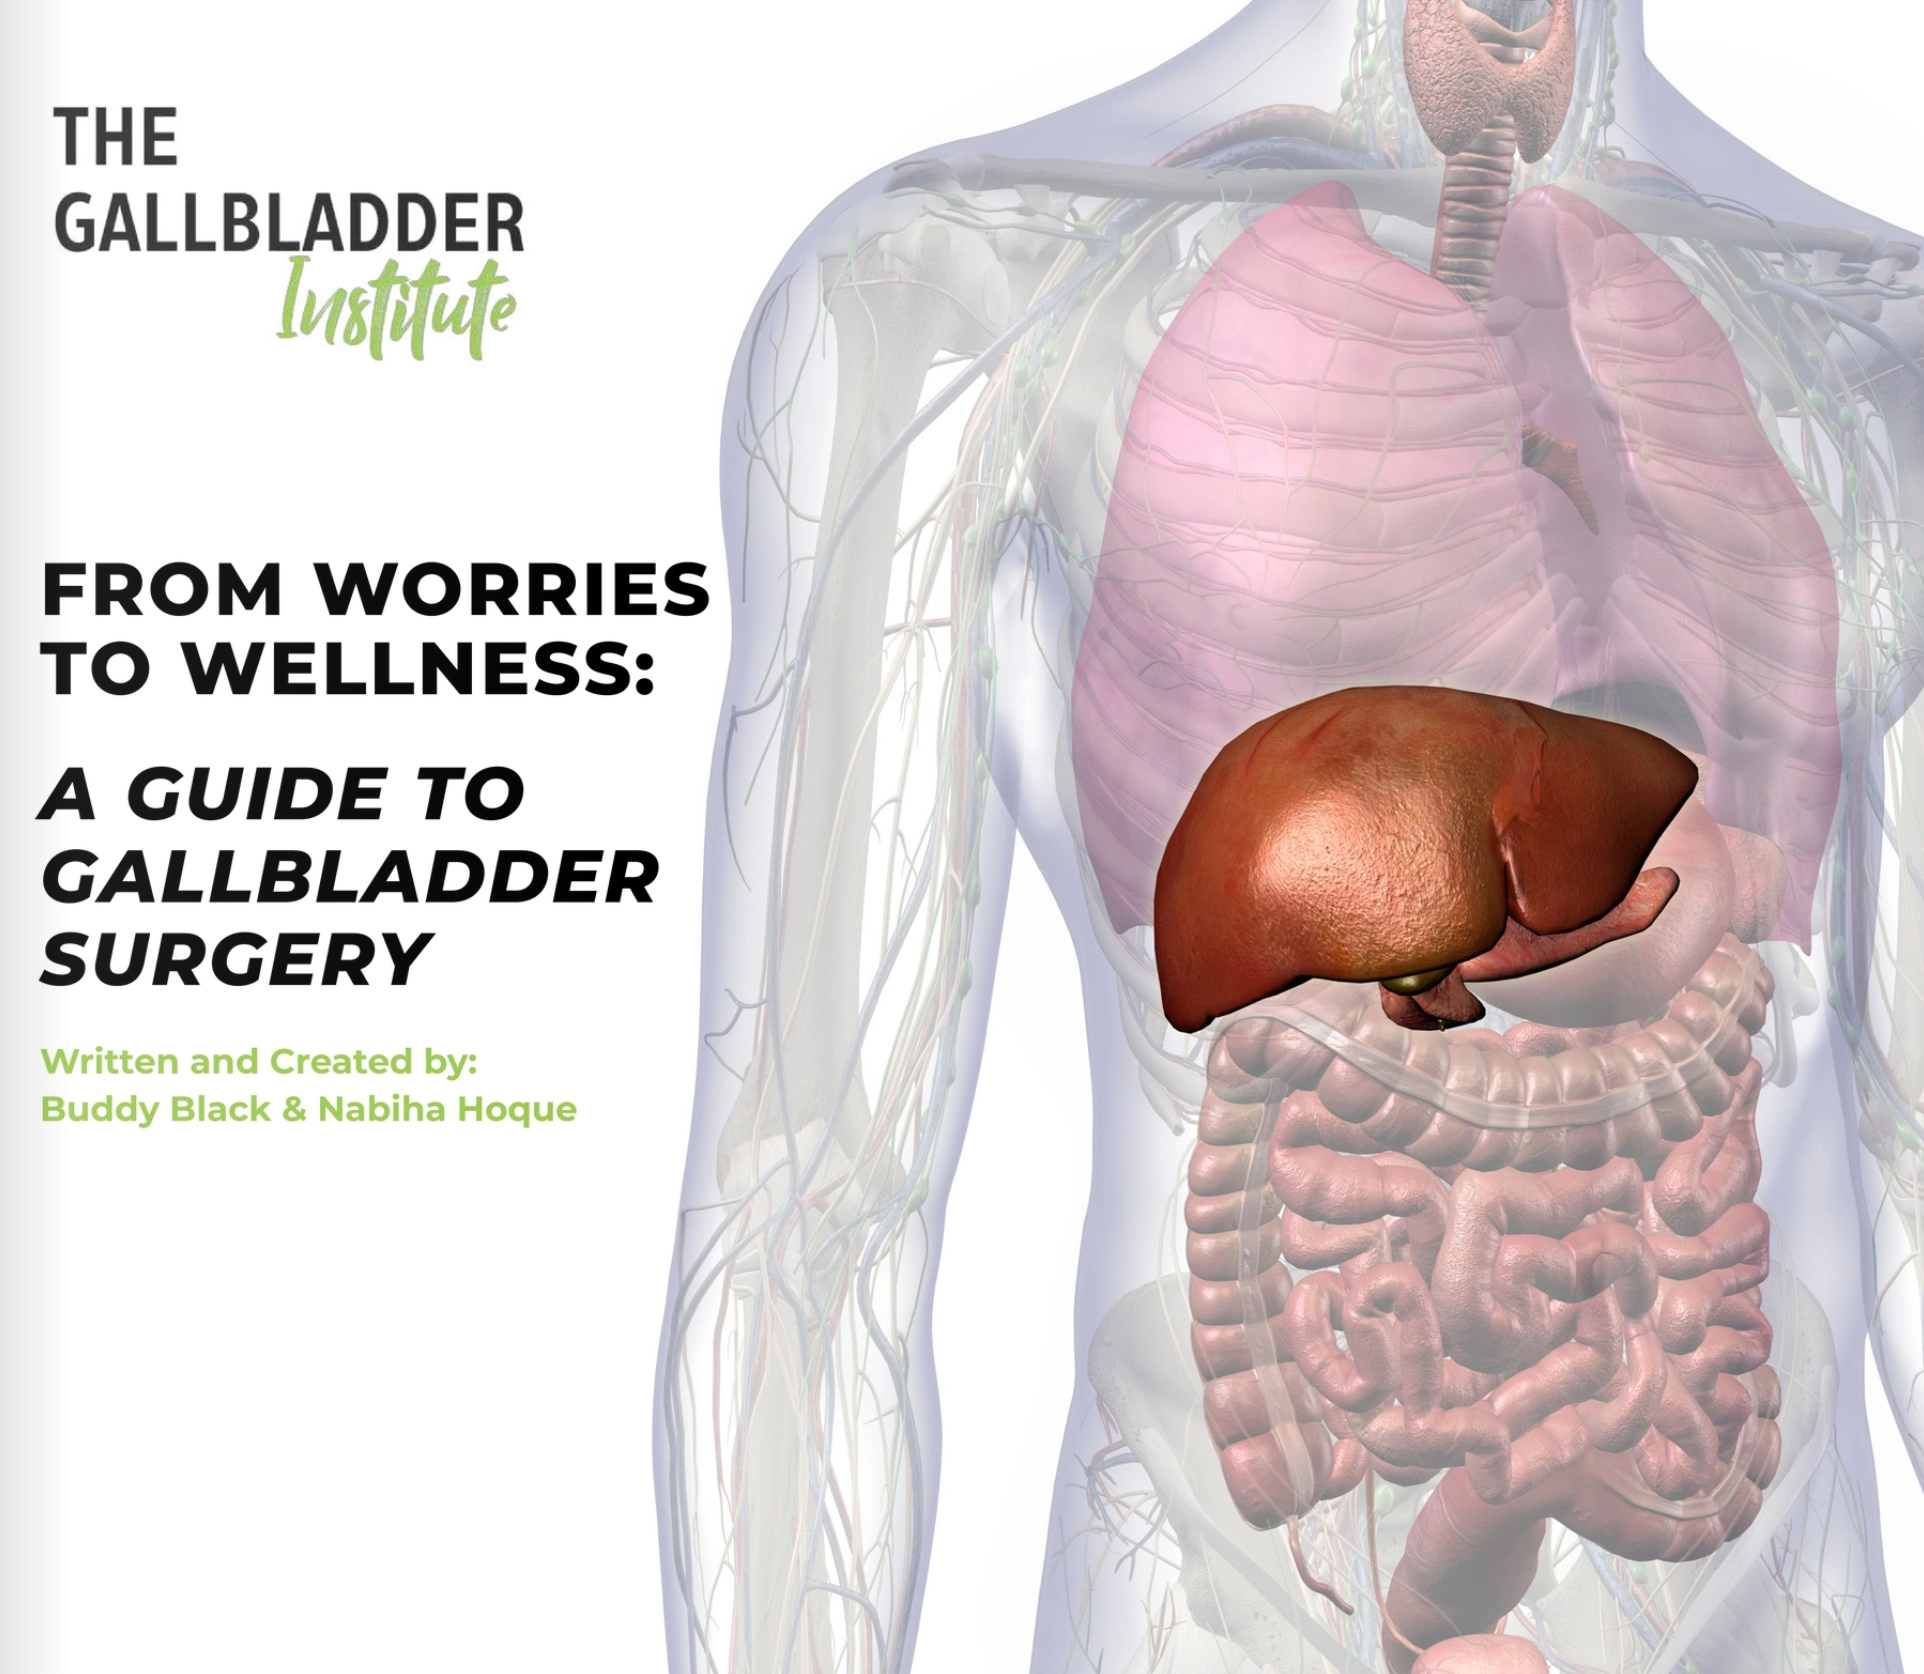 From Worries to Wellness: A Guide to Gallbladder Surgery